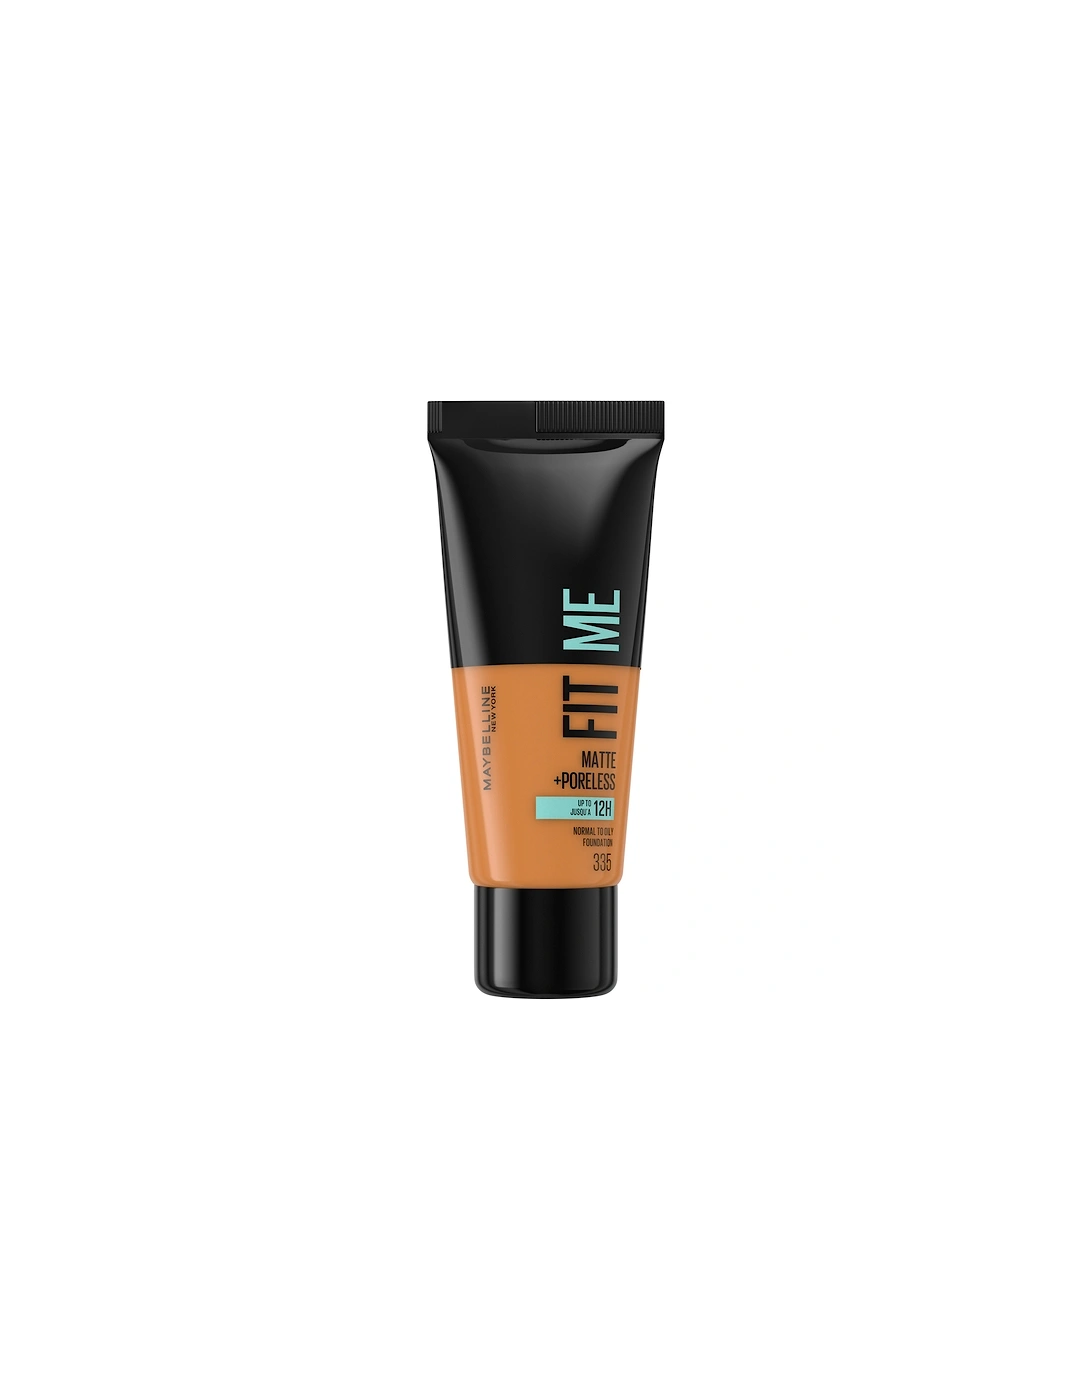 Fit Me! Matte and Poreless Foundation - 335 Classic Tan - - Fit Me! Matte and Poreless Foundation 30ml (Various Shades) - Foundation - Fit Me! Matte and Poreless Foundation 30ml (Various Shades) - Tina - Fit Me! Matte and Poreless Foundation 30ml (Various Shades) - Jo, 2 of 1